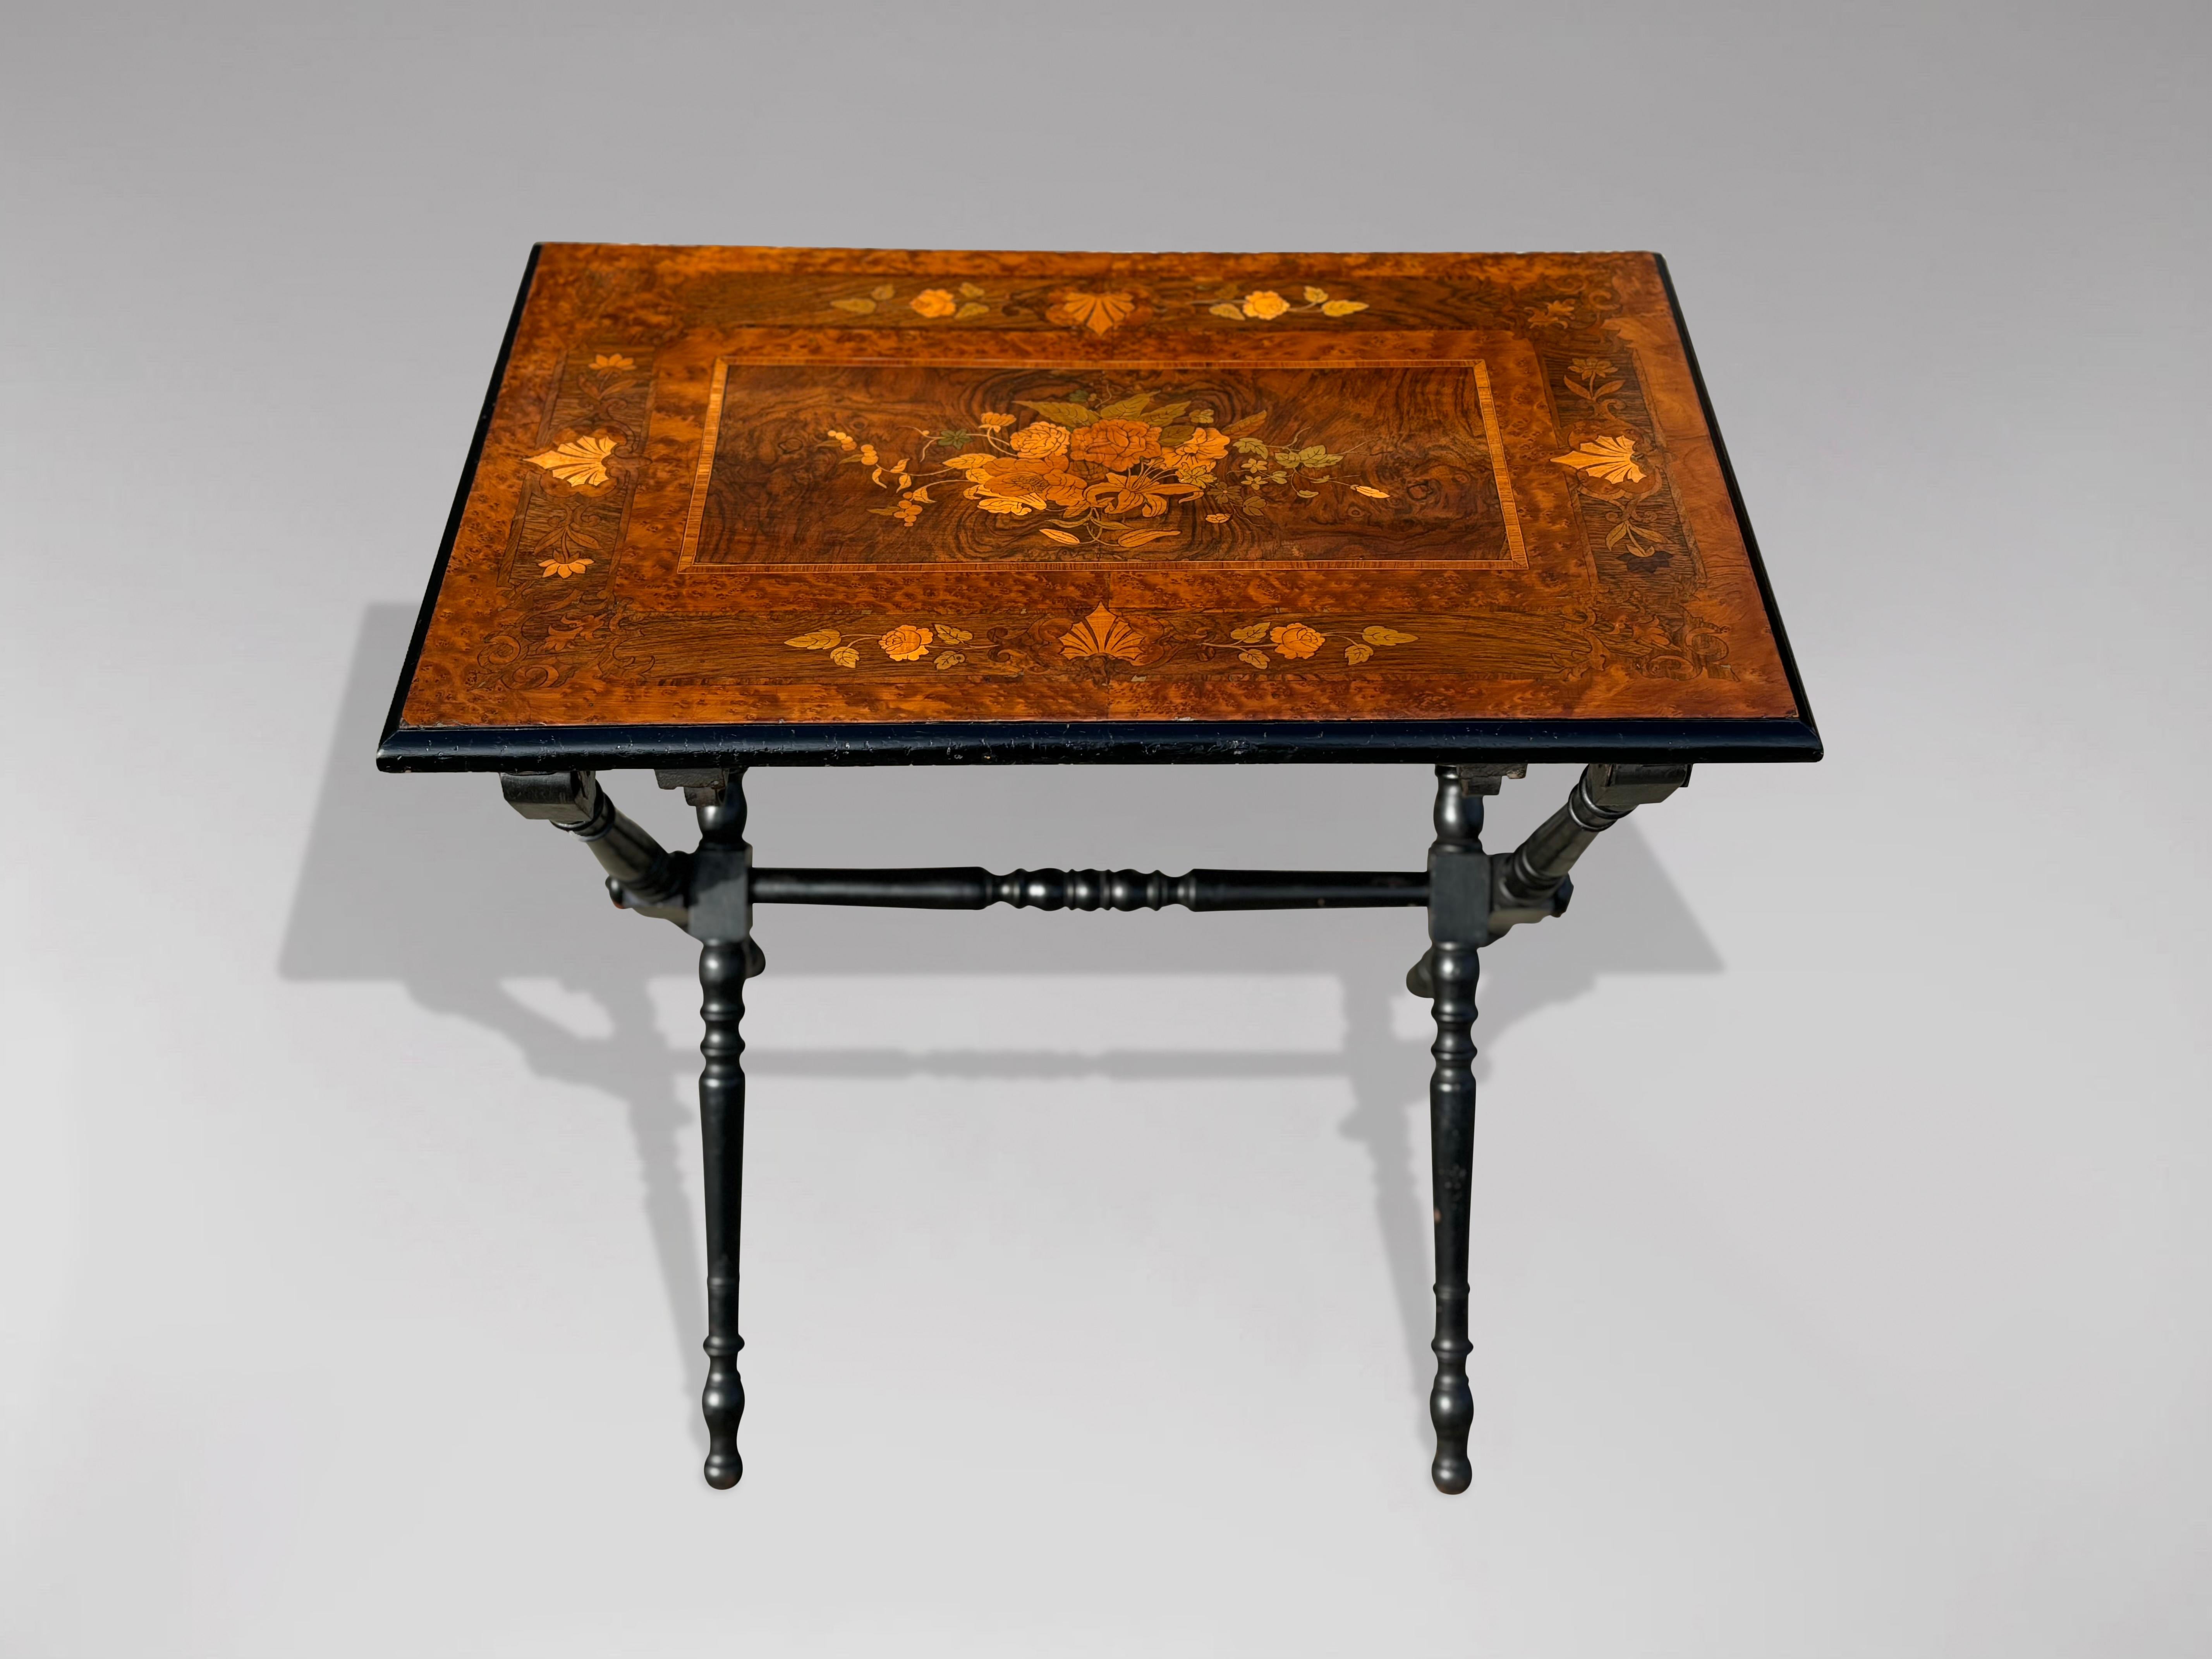 19th Century French Napoleon III Marquetry Folding Table In Good Condition For Sale In Petworth,West Sussex, GB